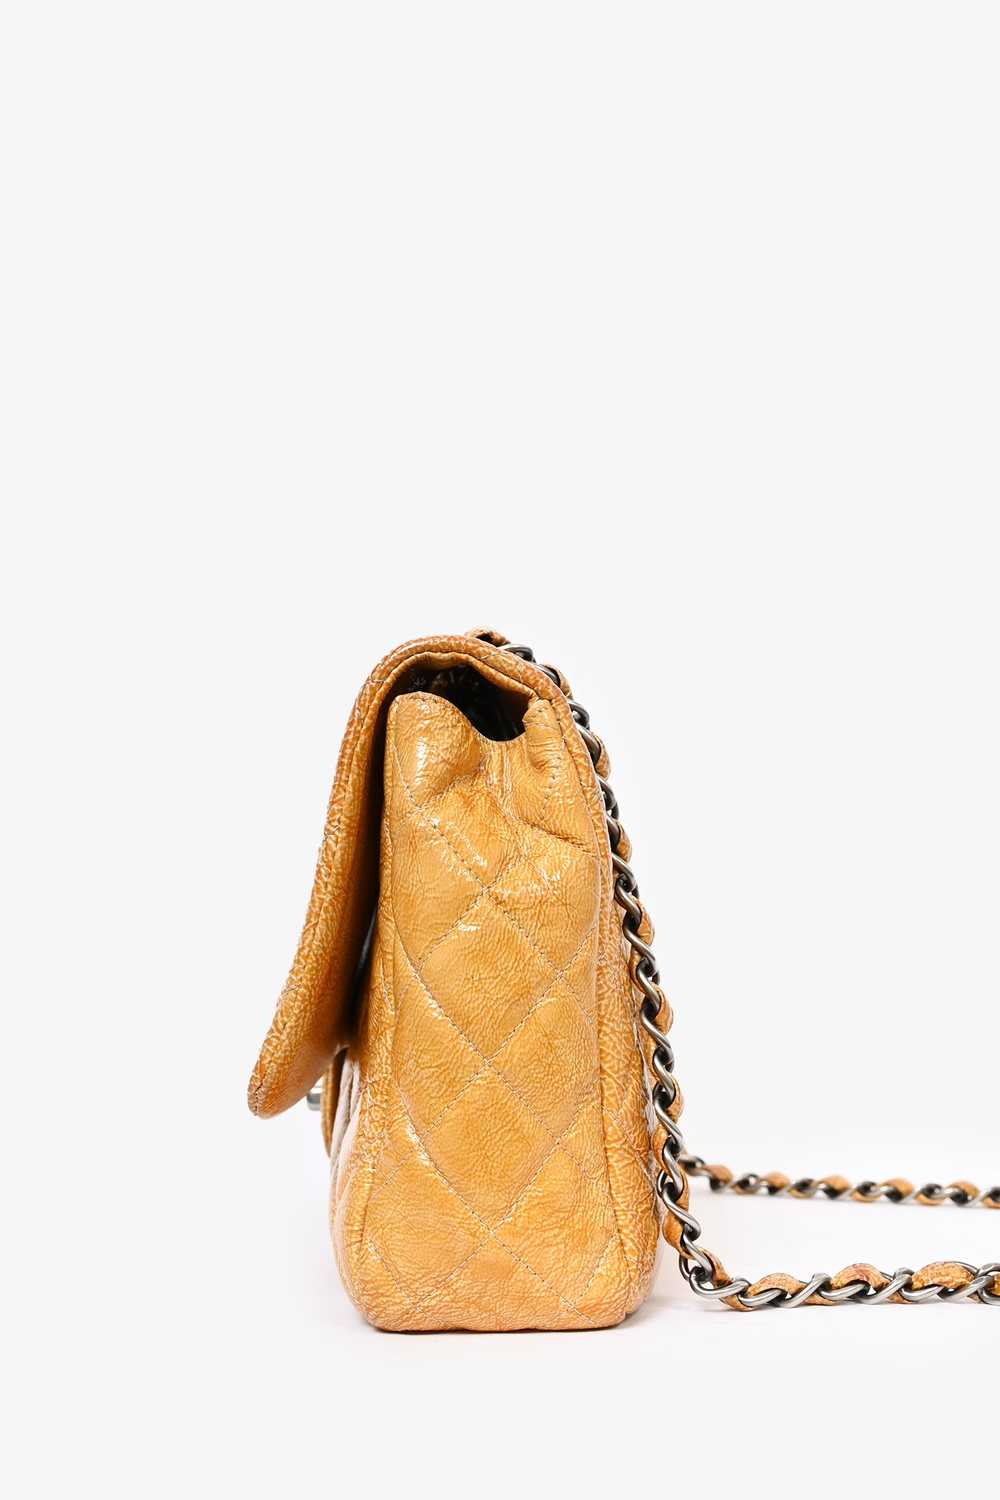 Pre-Loved Chanel™ 2008 Yellow Crinkled Patent Lea… - image 4